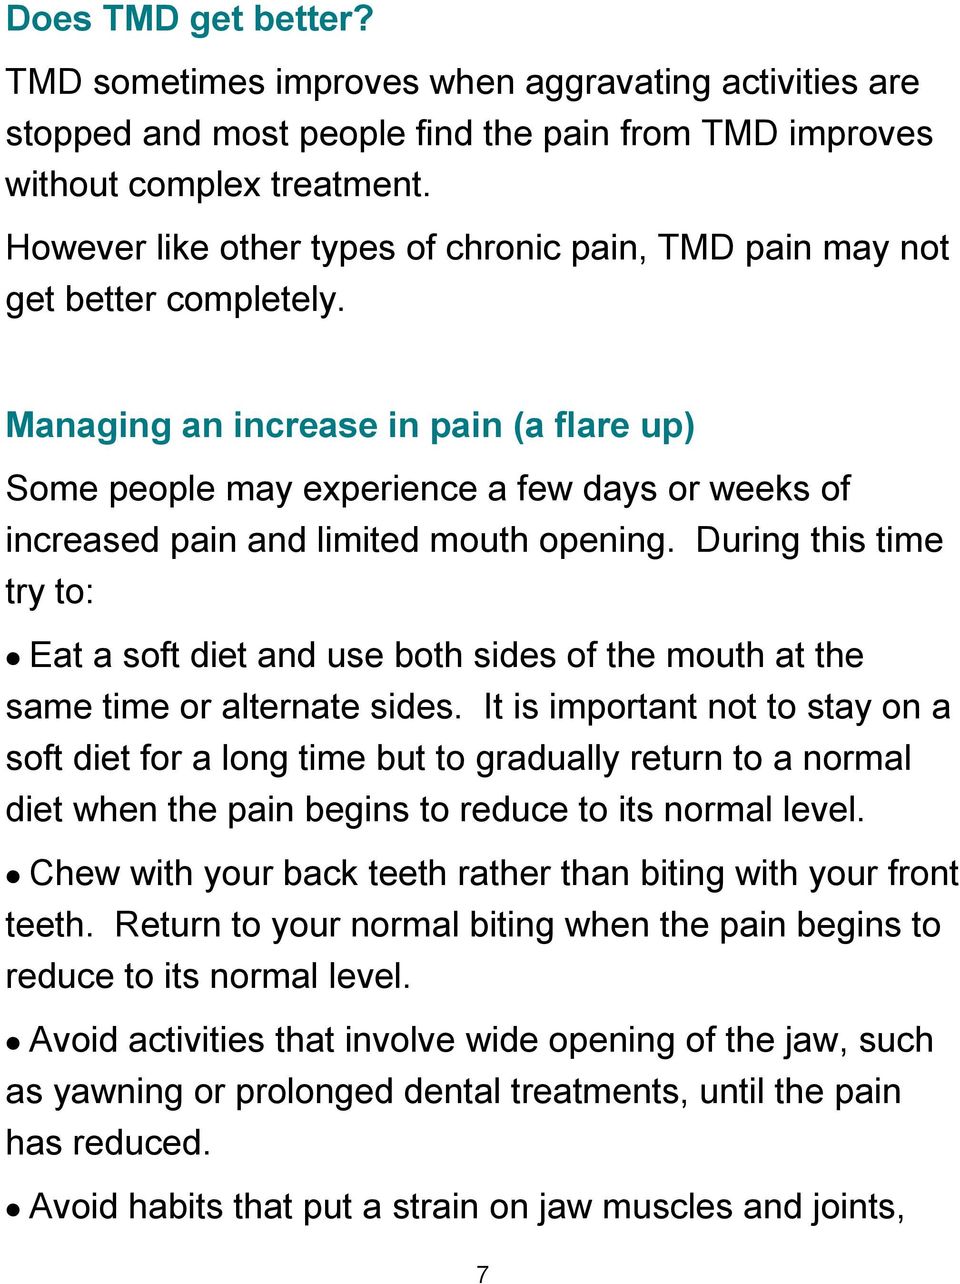 Managing an increase in pain (a flare up) Some people may experience a few days or weeks of increased pain and limited mouth opening.